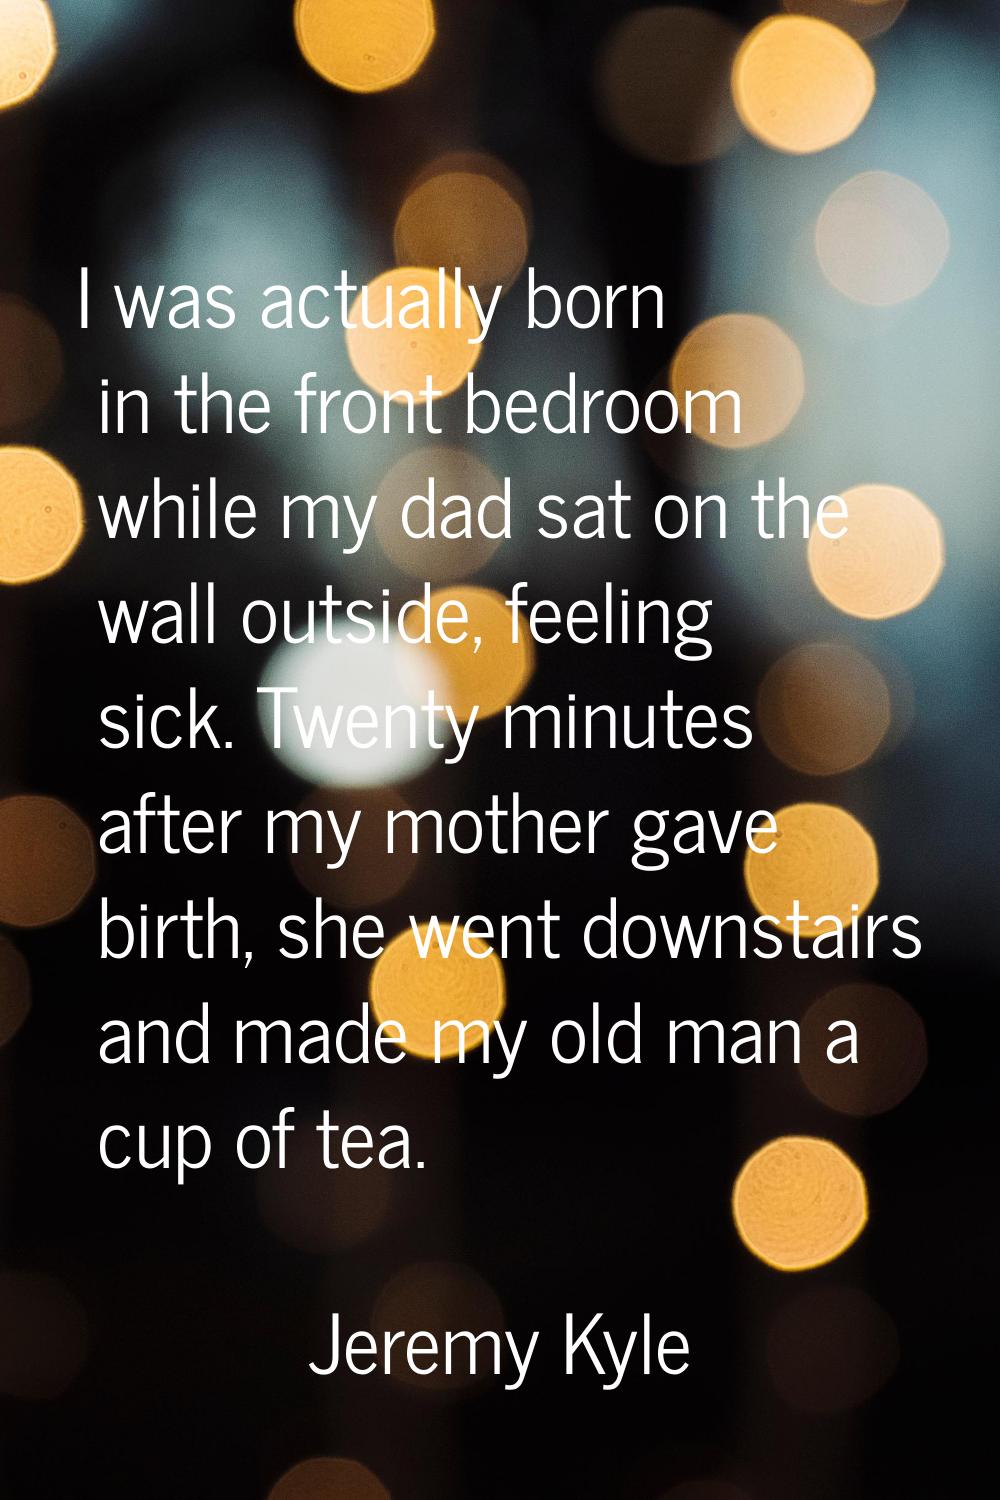 I was actually born in the front bedroom while my dad sat on the wall outside, feeling sick. Twenty